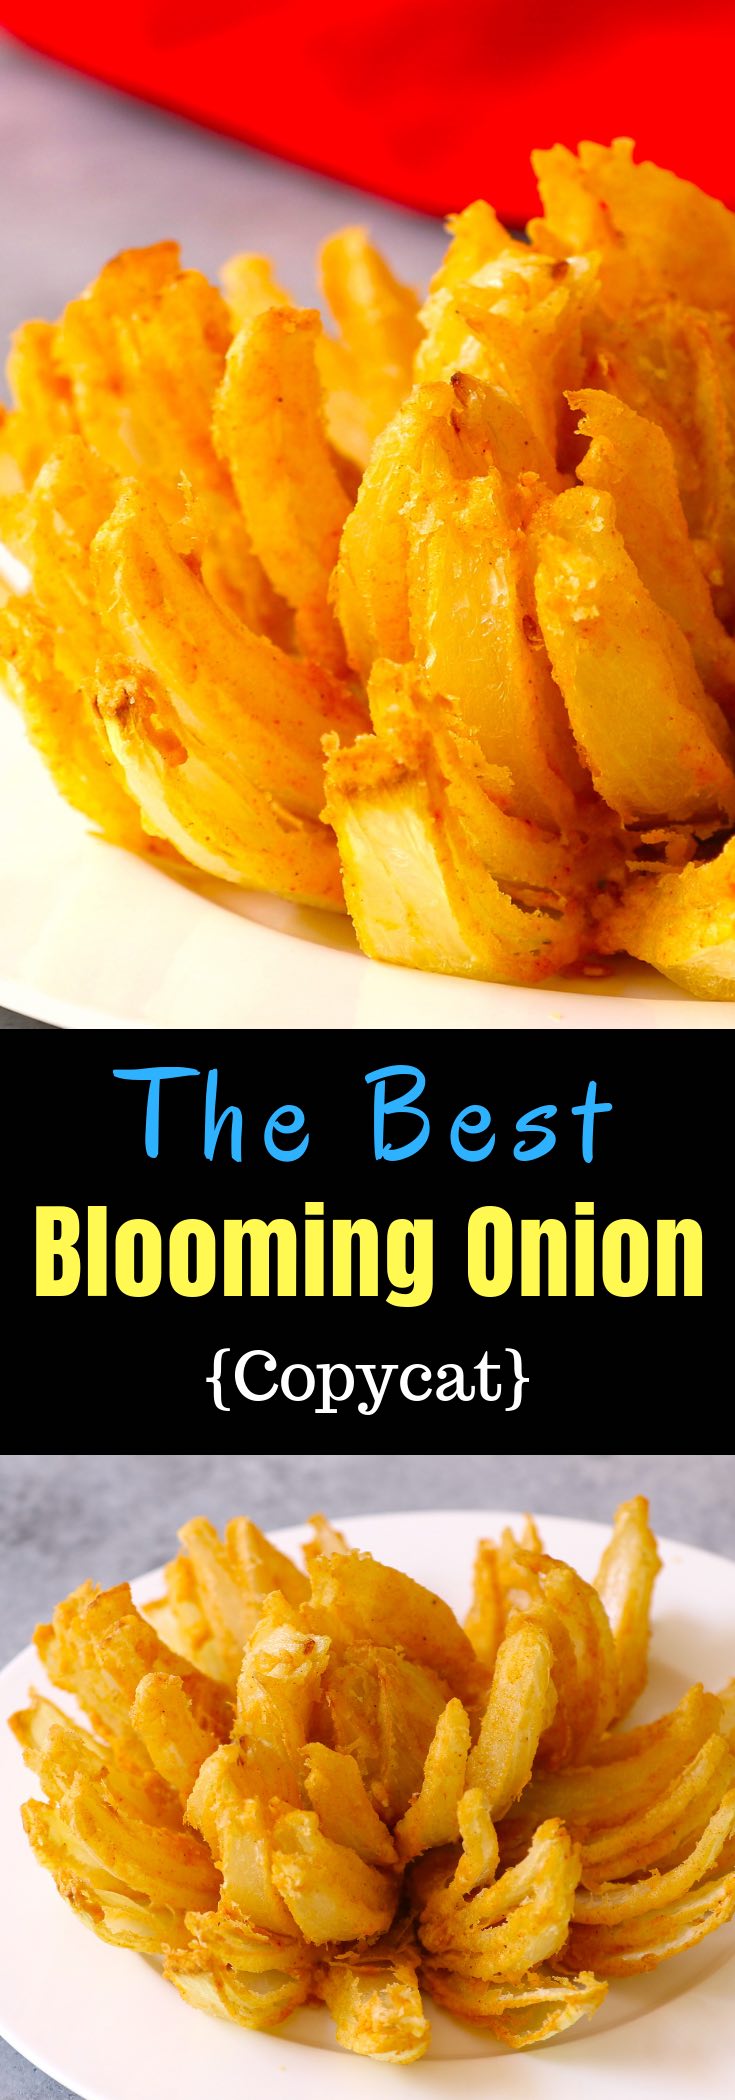 Similar to the famous Outback Steak's blooming onion, Chili's Awesome Blossom Petals is a delicious and crispy appetizer! Learn how to make Awesome Blossom easily at home with our step-by-step instructions. 